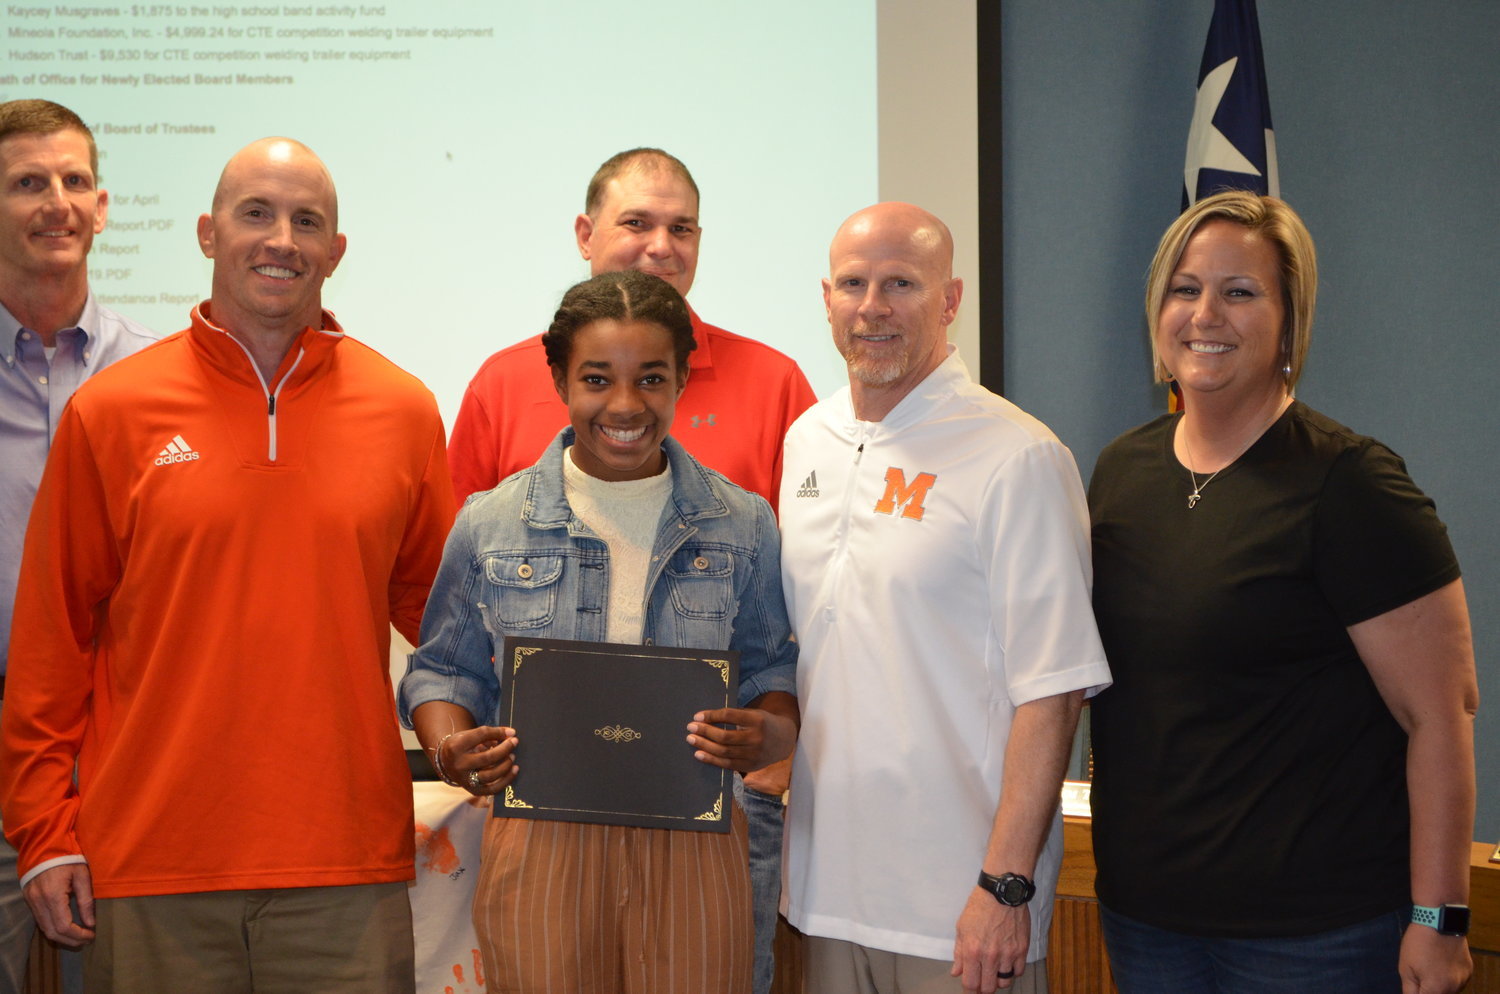 Abeni Kratzmeyer was recognized at Monday night’s MISD school board meeting for her accomplishment in repeating as class 3A state pole vault champion. Her coaches described her as a dedicated athlete as well as fine student and an exceptional person. From left are school Trustee Kyle Gully, athletic director Luke Blackwell, Kratzmeyer, Trustee Daniel Louderman, coach Bill Self, and coach Kerry Van Cleave.